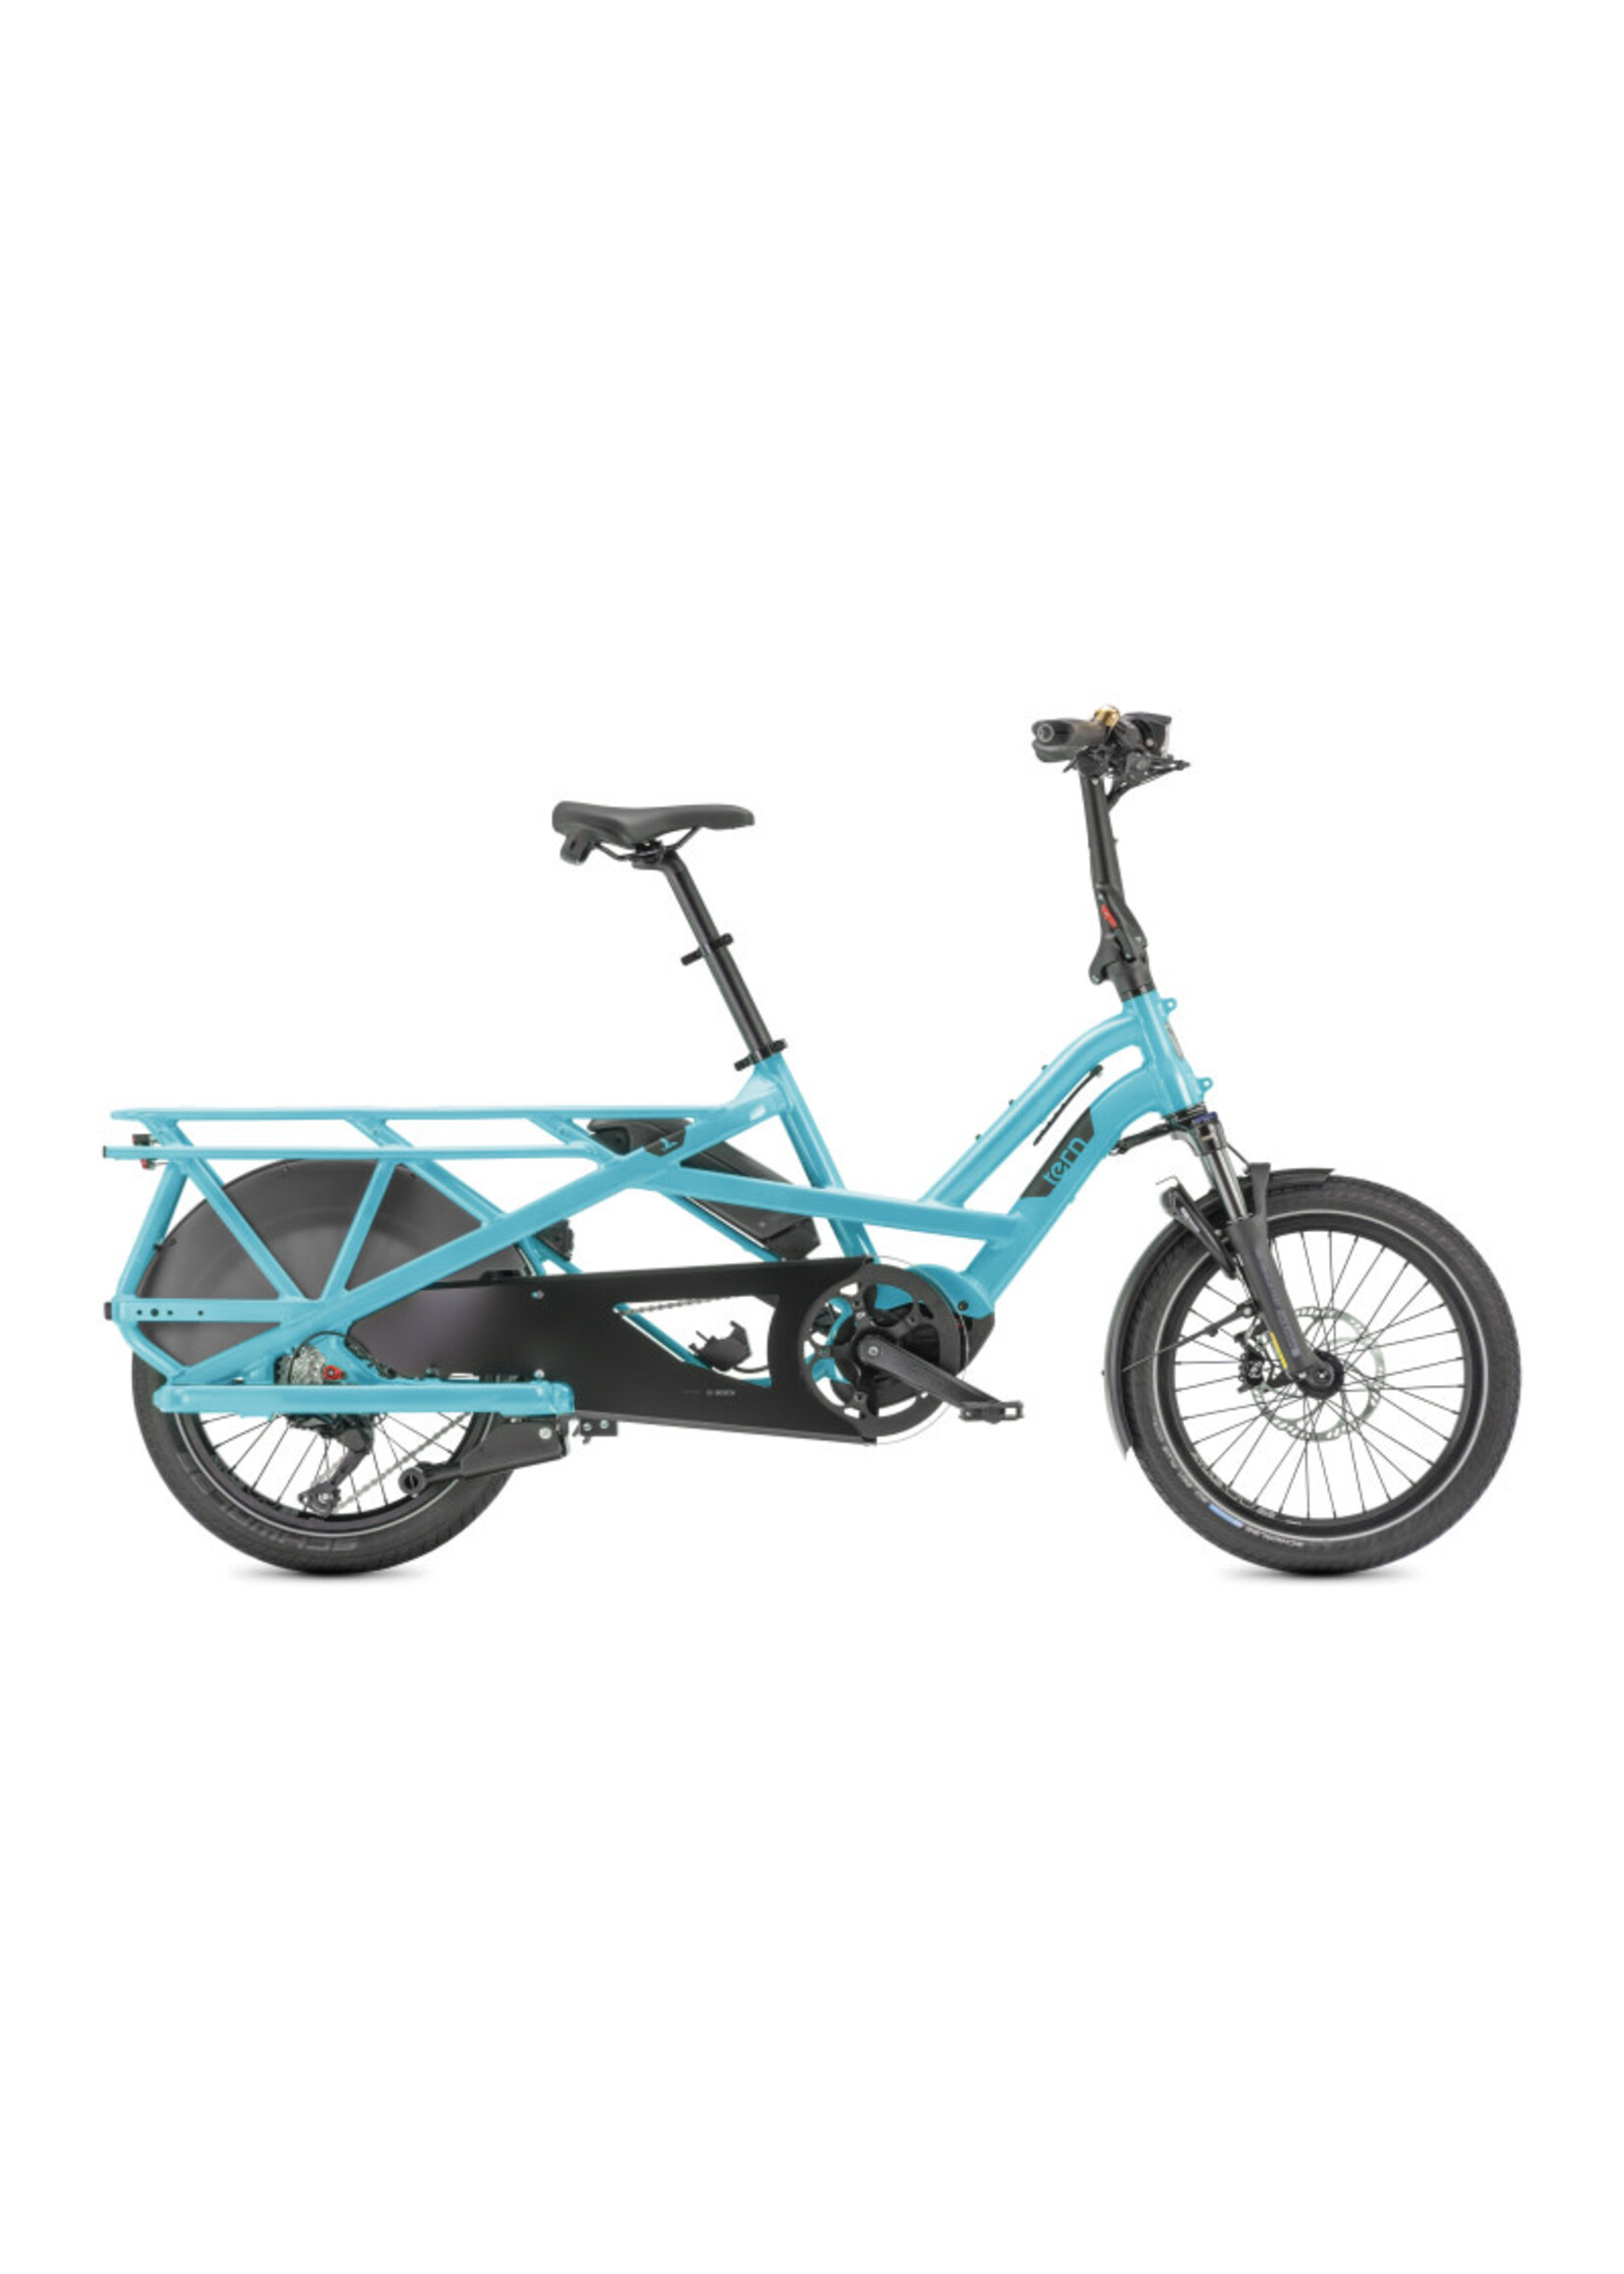 Tern GSD S10 Cargo line - 500 wh - shimano - 1x10 - beetle blue